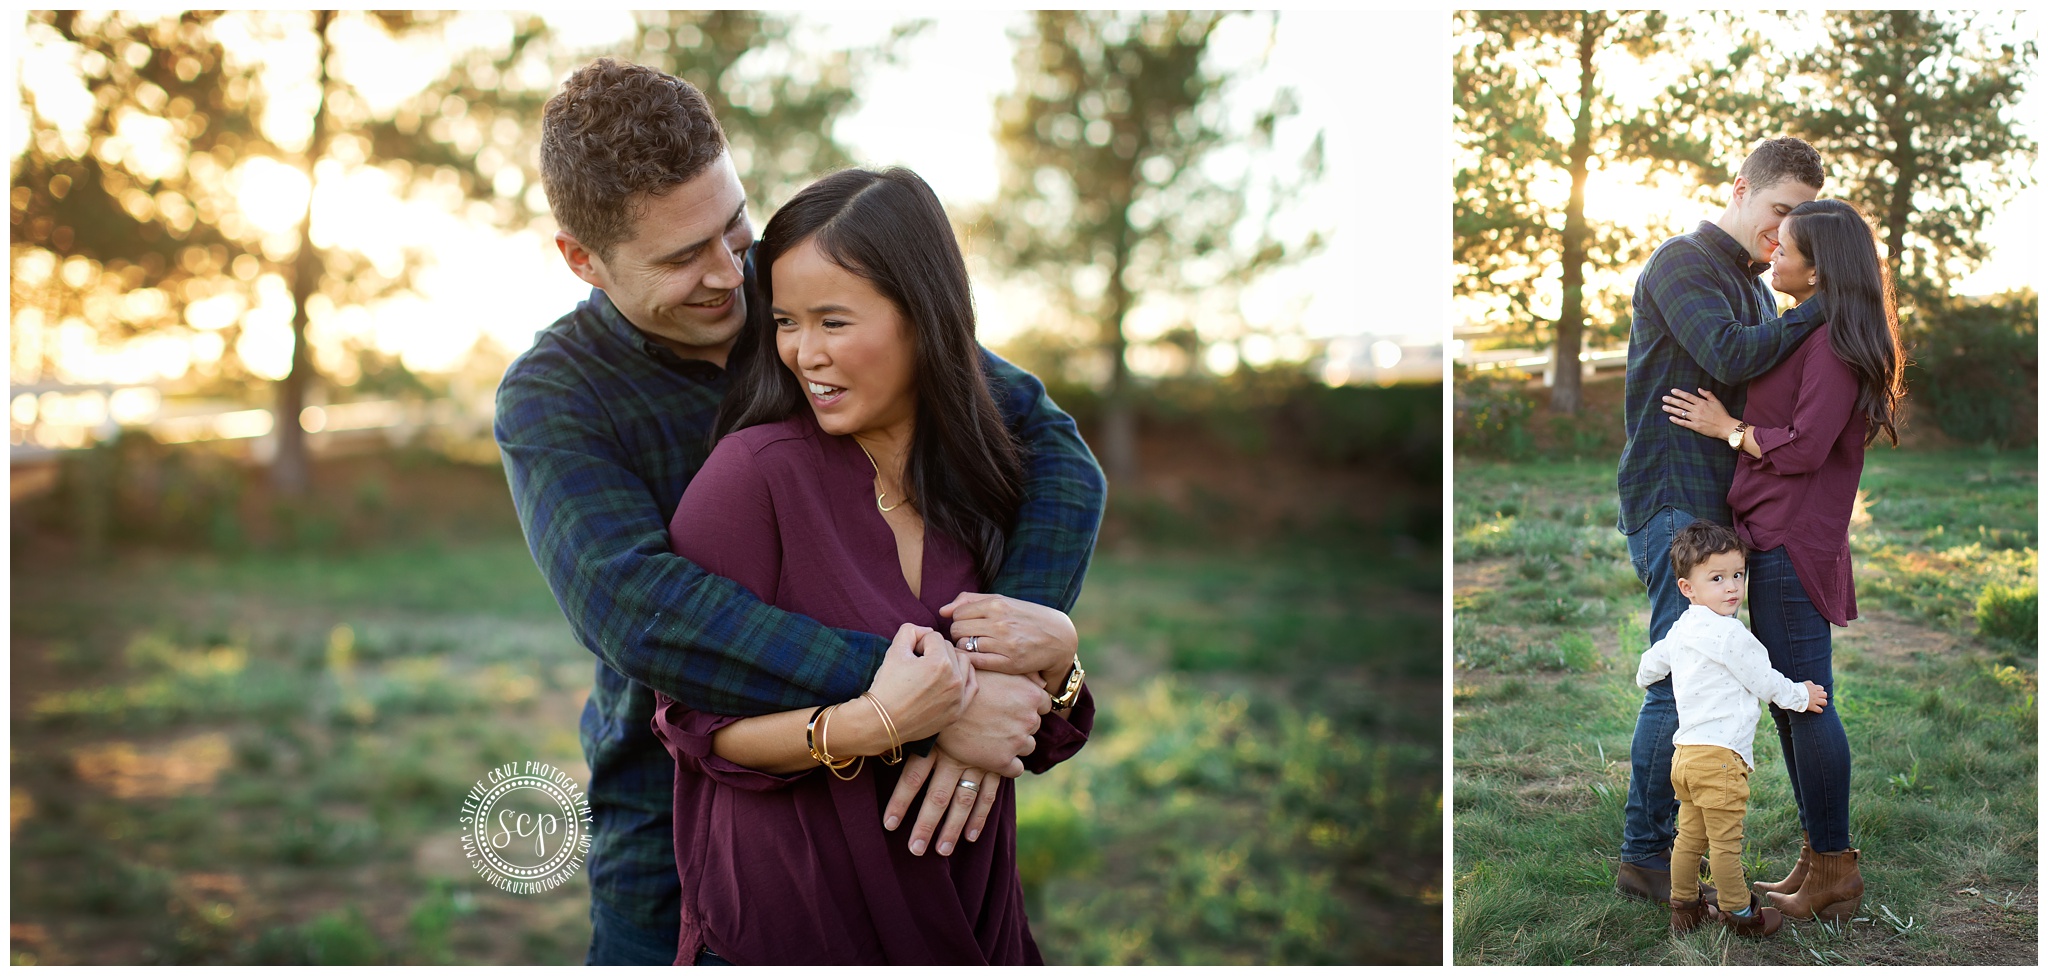 Parents need a pose during family pictures too. Photos by Stevie Cruz Photography